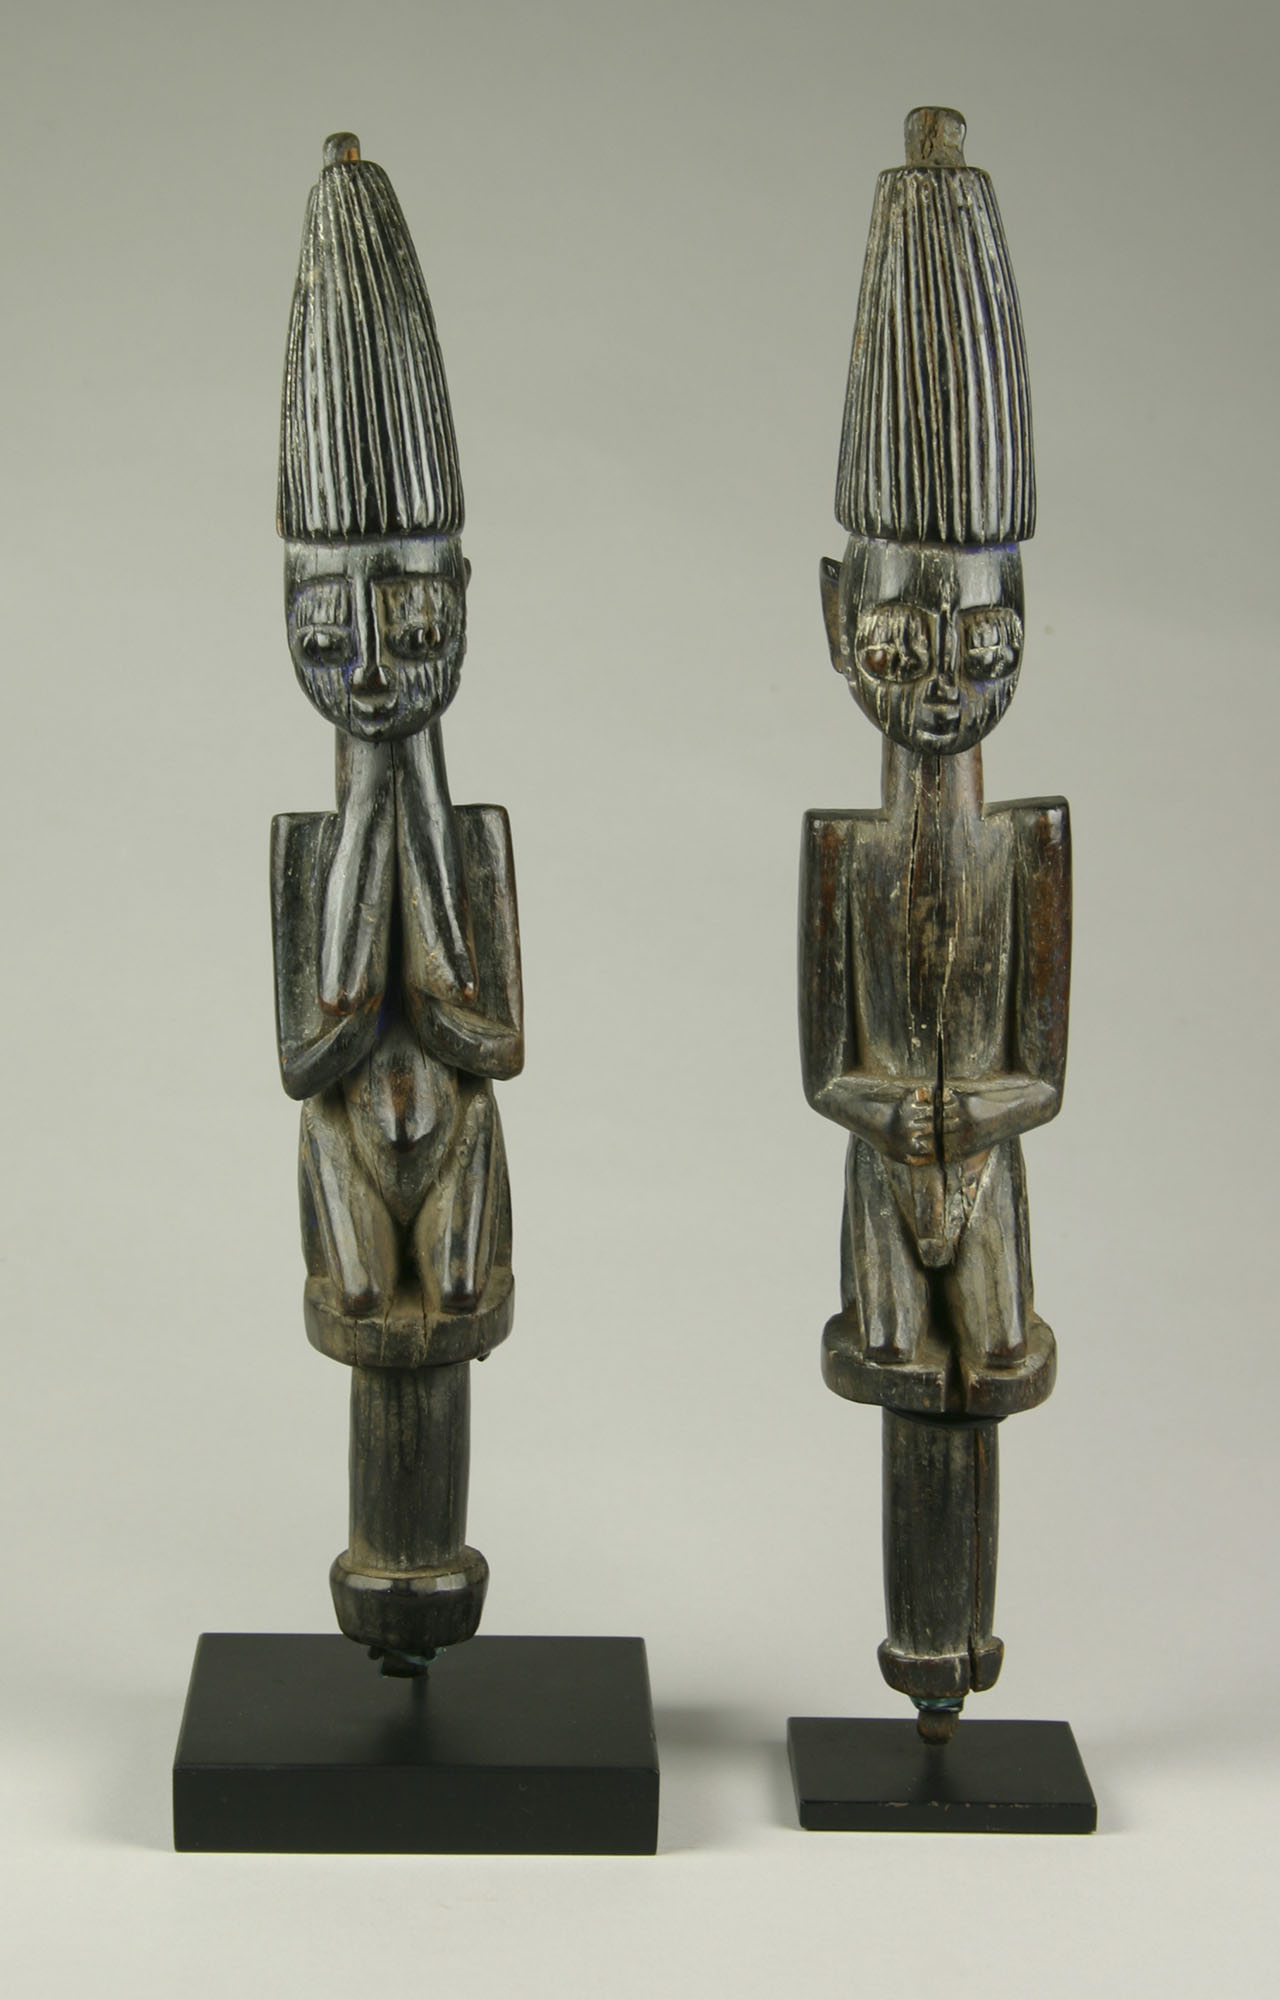 Unidentified artist (Yoruba; Nigeria, Africa), Pair of Esu staffs, 20th century. Carved wood. Collection of DePaul Art Museum, gift of the May Weber Foundation, 2001.103ab